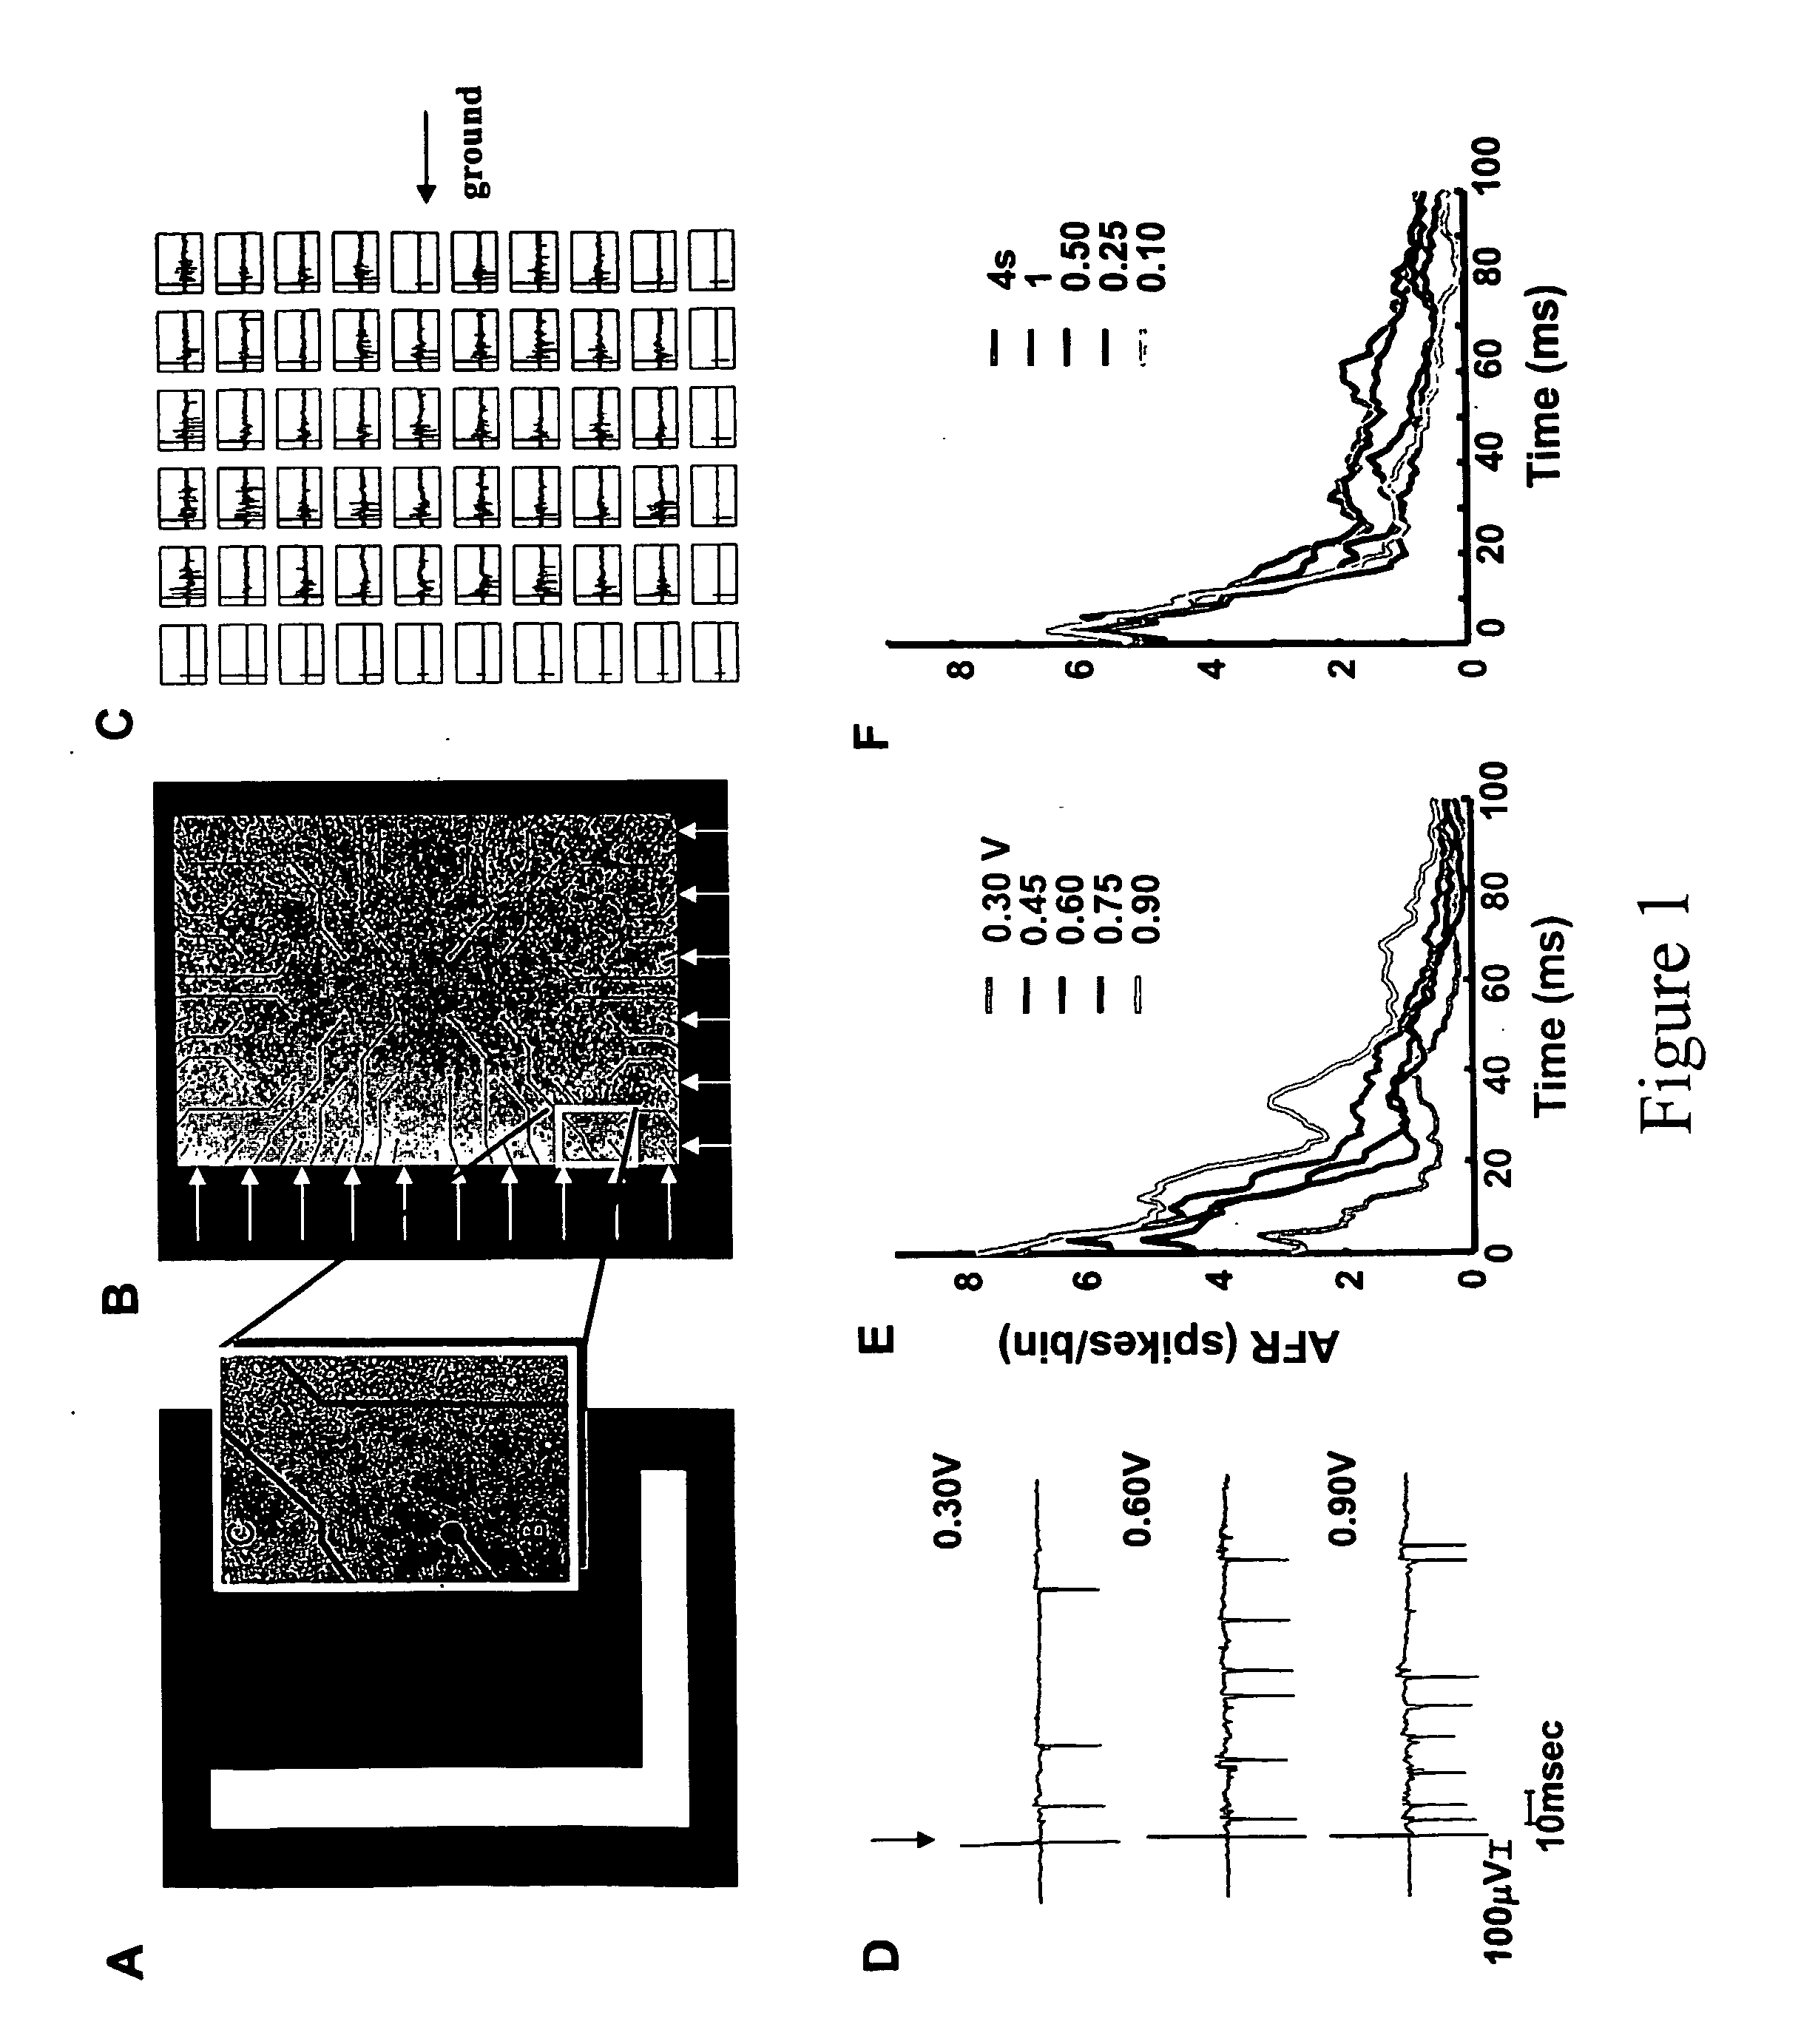 Method and device for image processing and learning with neuronal cultures